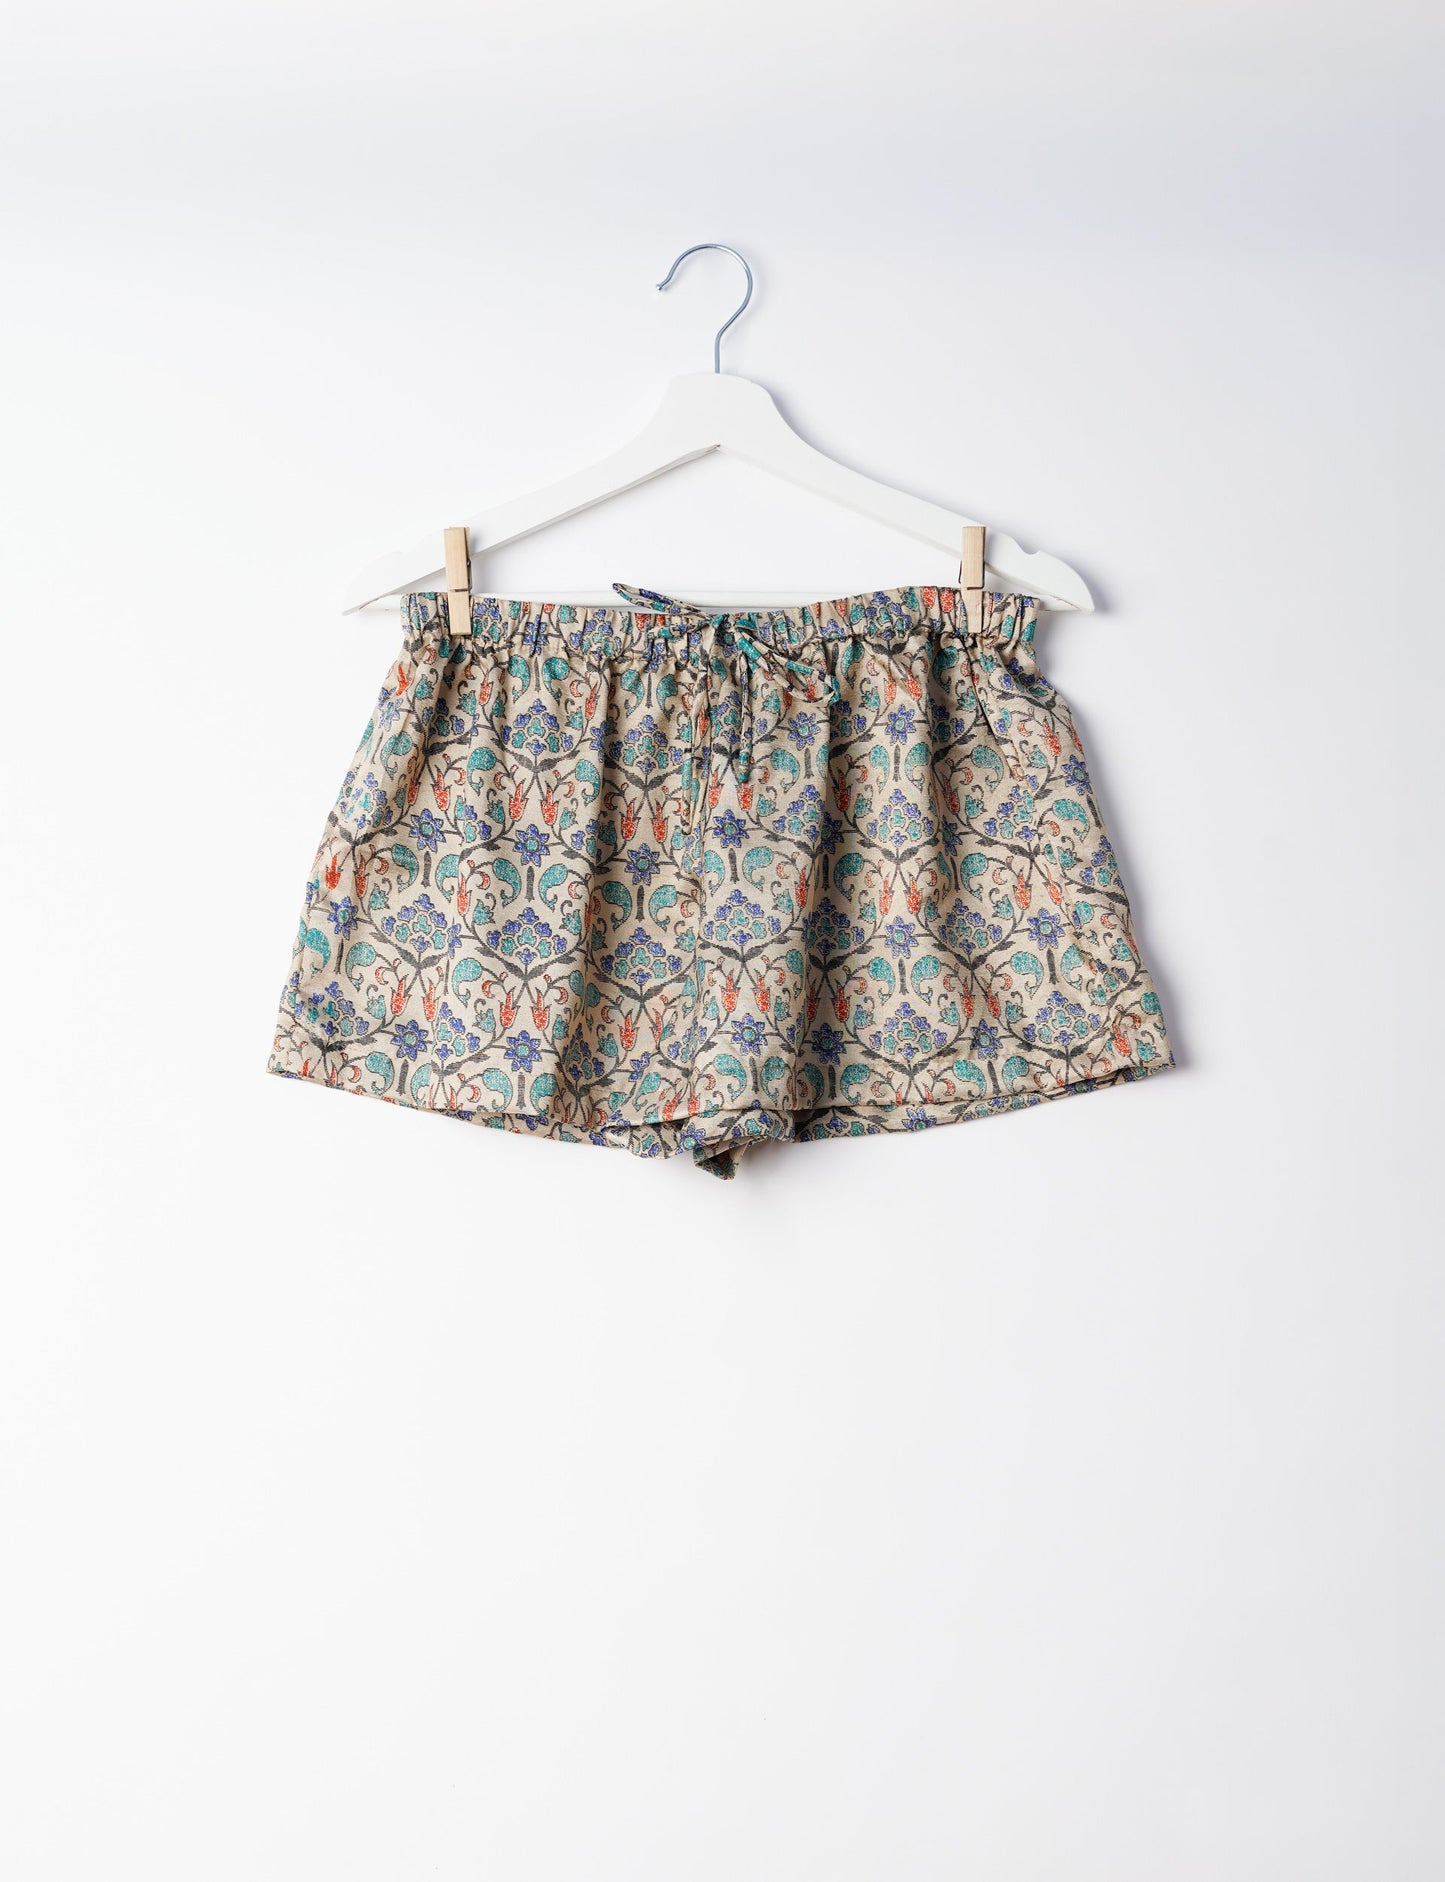 Sleep in eco-friendly luxury with our PJ Set Short. Made for the conscious consumer, these pajamas contribute to zero waste and sustainable practices. The cami top, adorned with delicate eyelash lace and cut on the bias, pairs seamlessly with the comfy shorts featuring an elasticated waist and drawstring tie.